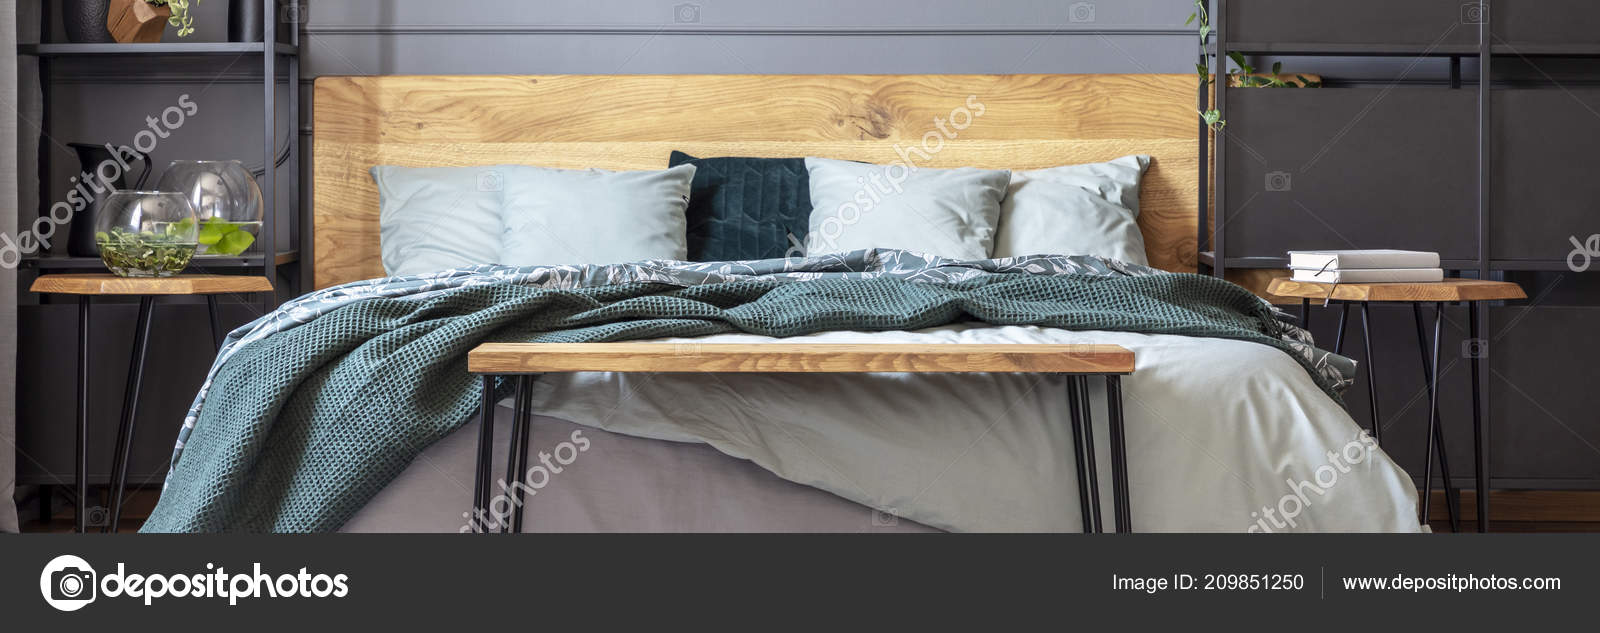 Panorama Wooden Bench Front Bed Green Blanket Grey Bedroom Interior Stock Photo Image By C Photographee Eu 209851250